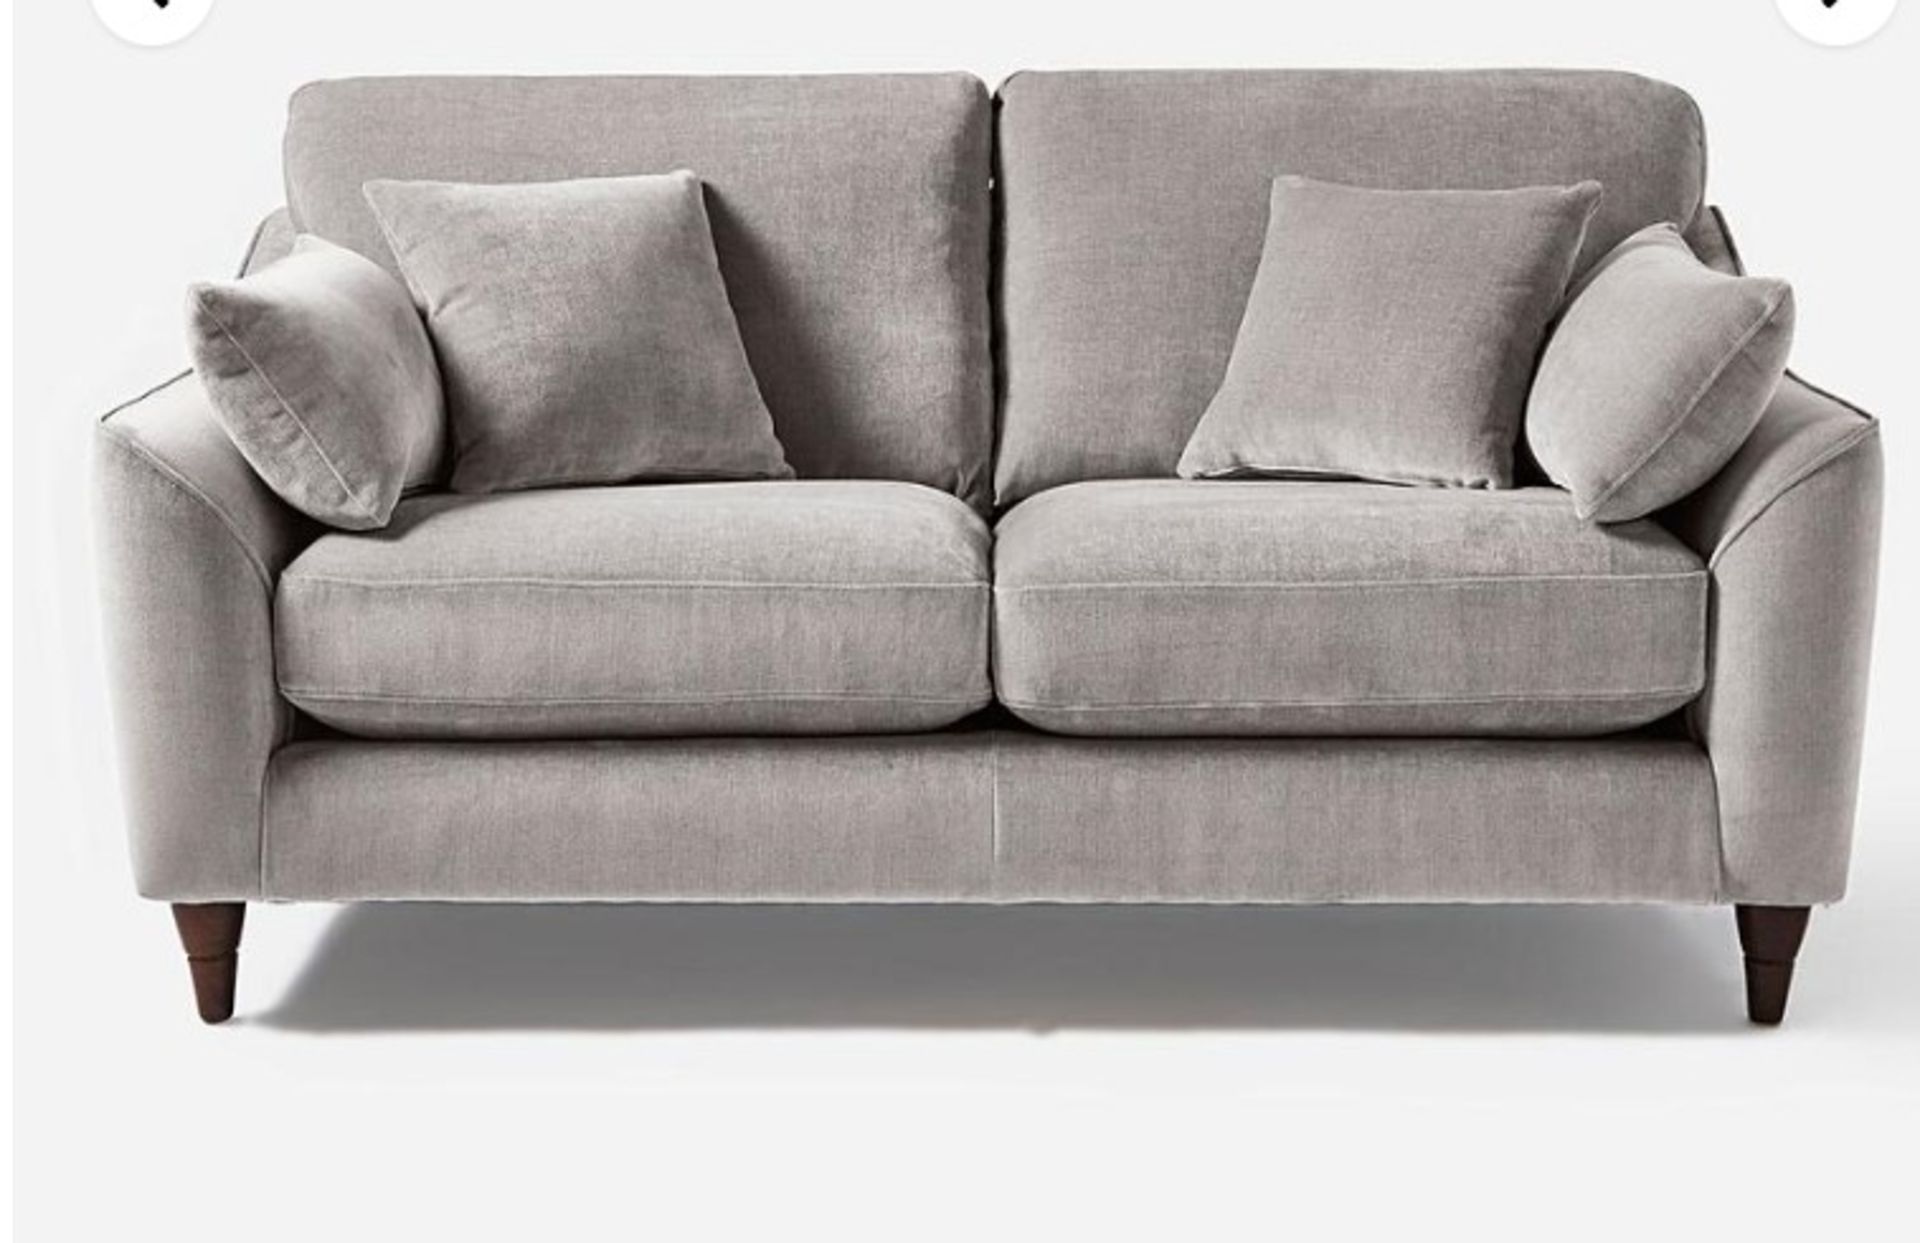 Hepburn 2 Seater Sofa. - ER23. RRP £1,249.00. The Hepburn 2 Seater Sofa features a classic, curved - Image 2 of 2